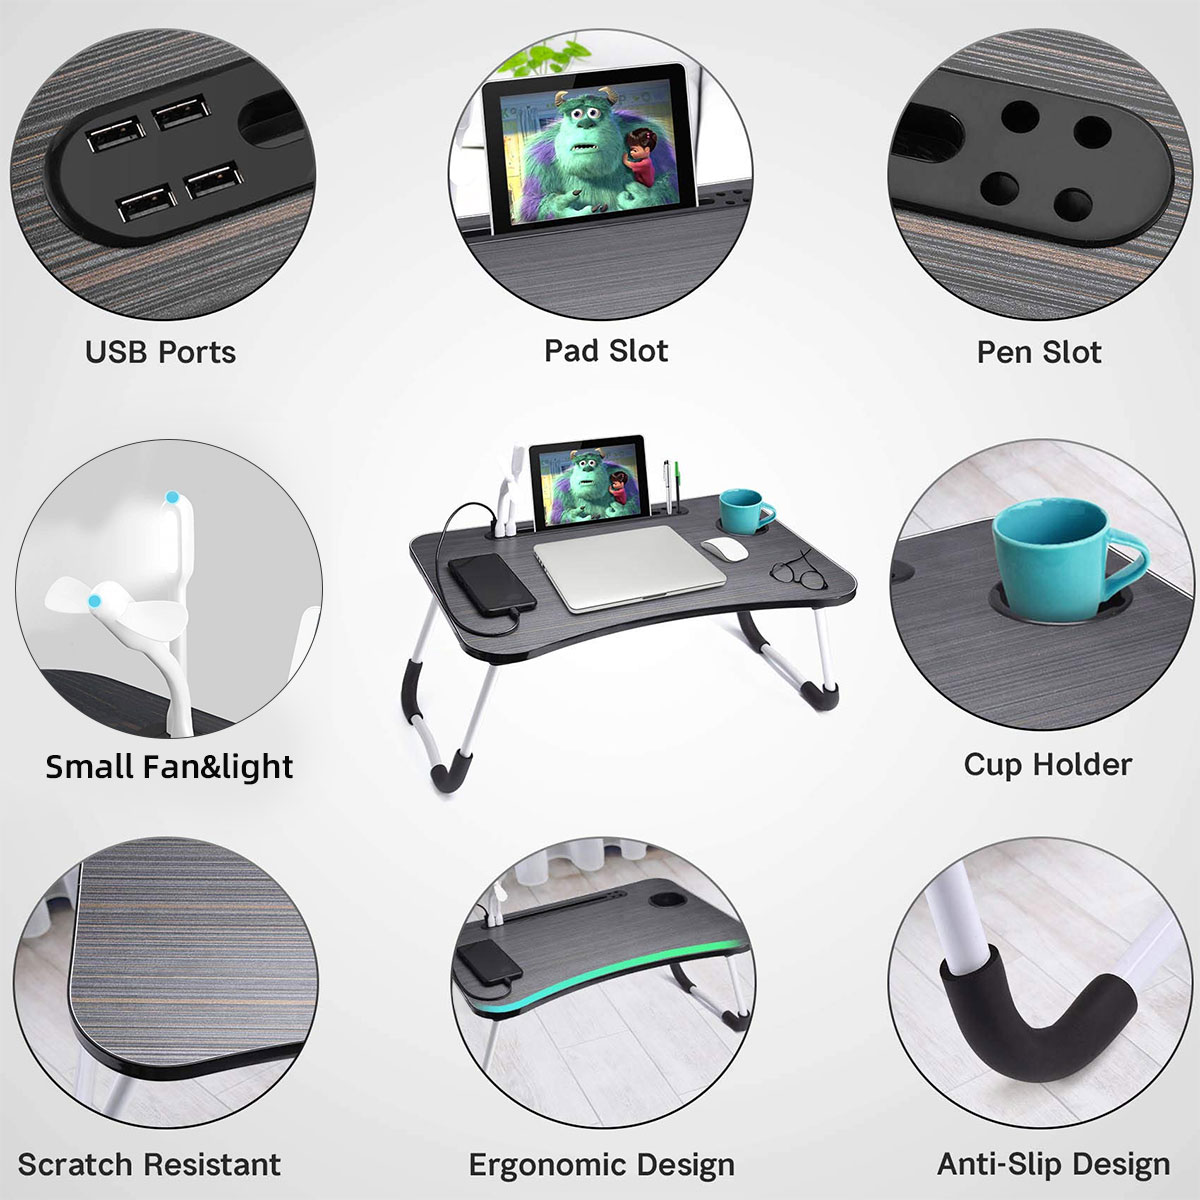 Multifunctional-Curved-Design-Folding-with-USB-Charging-Port-Pen-Cup-Slot-Home-Bed-Macbook-Phone-Sto-1872074-2